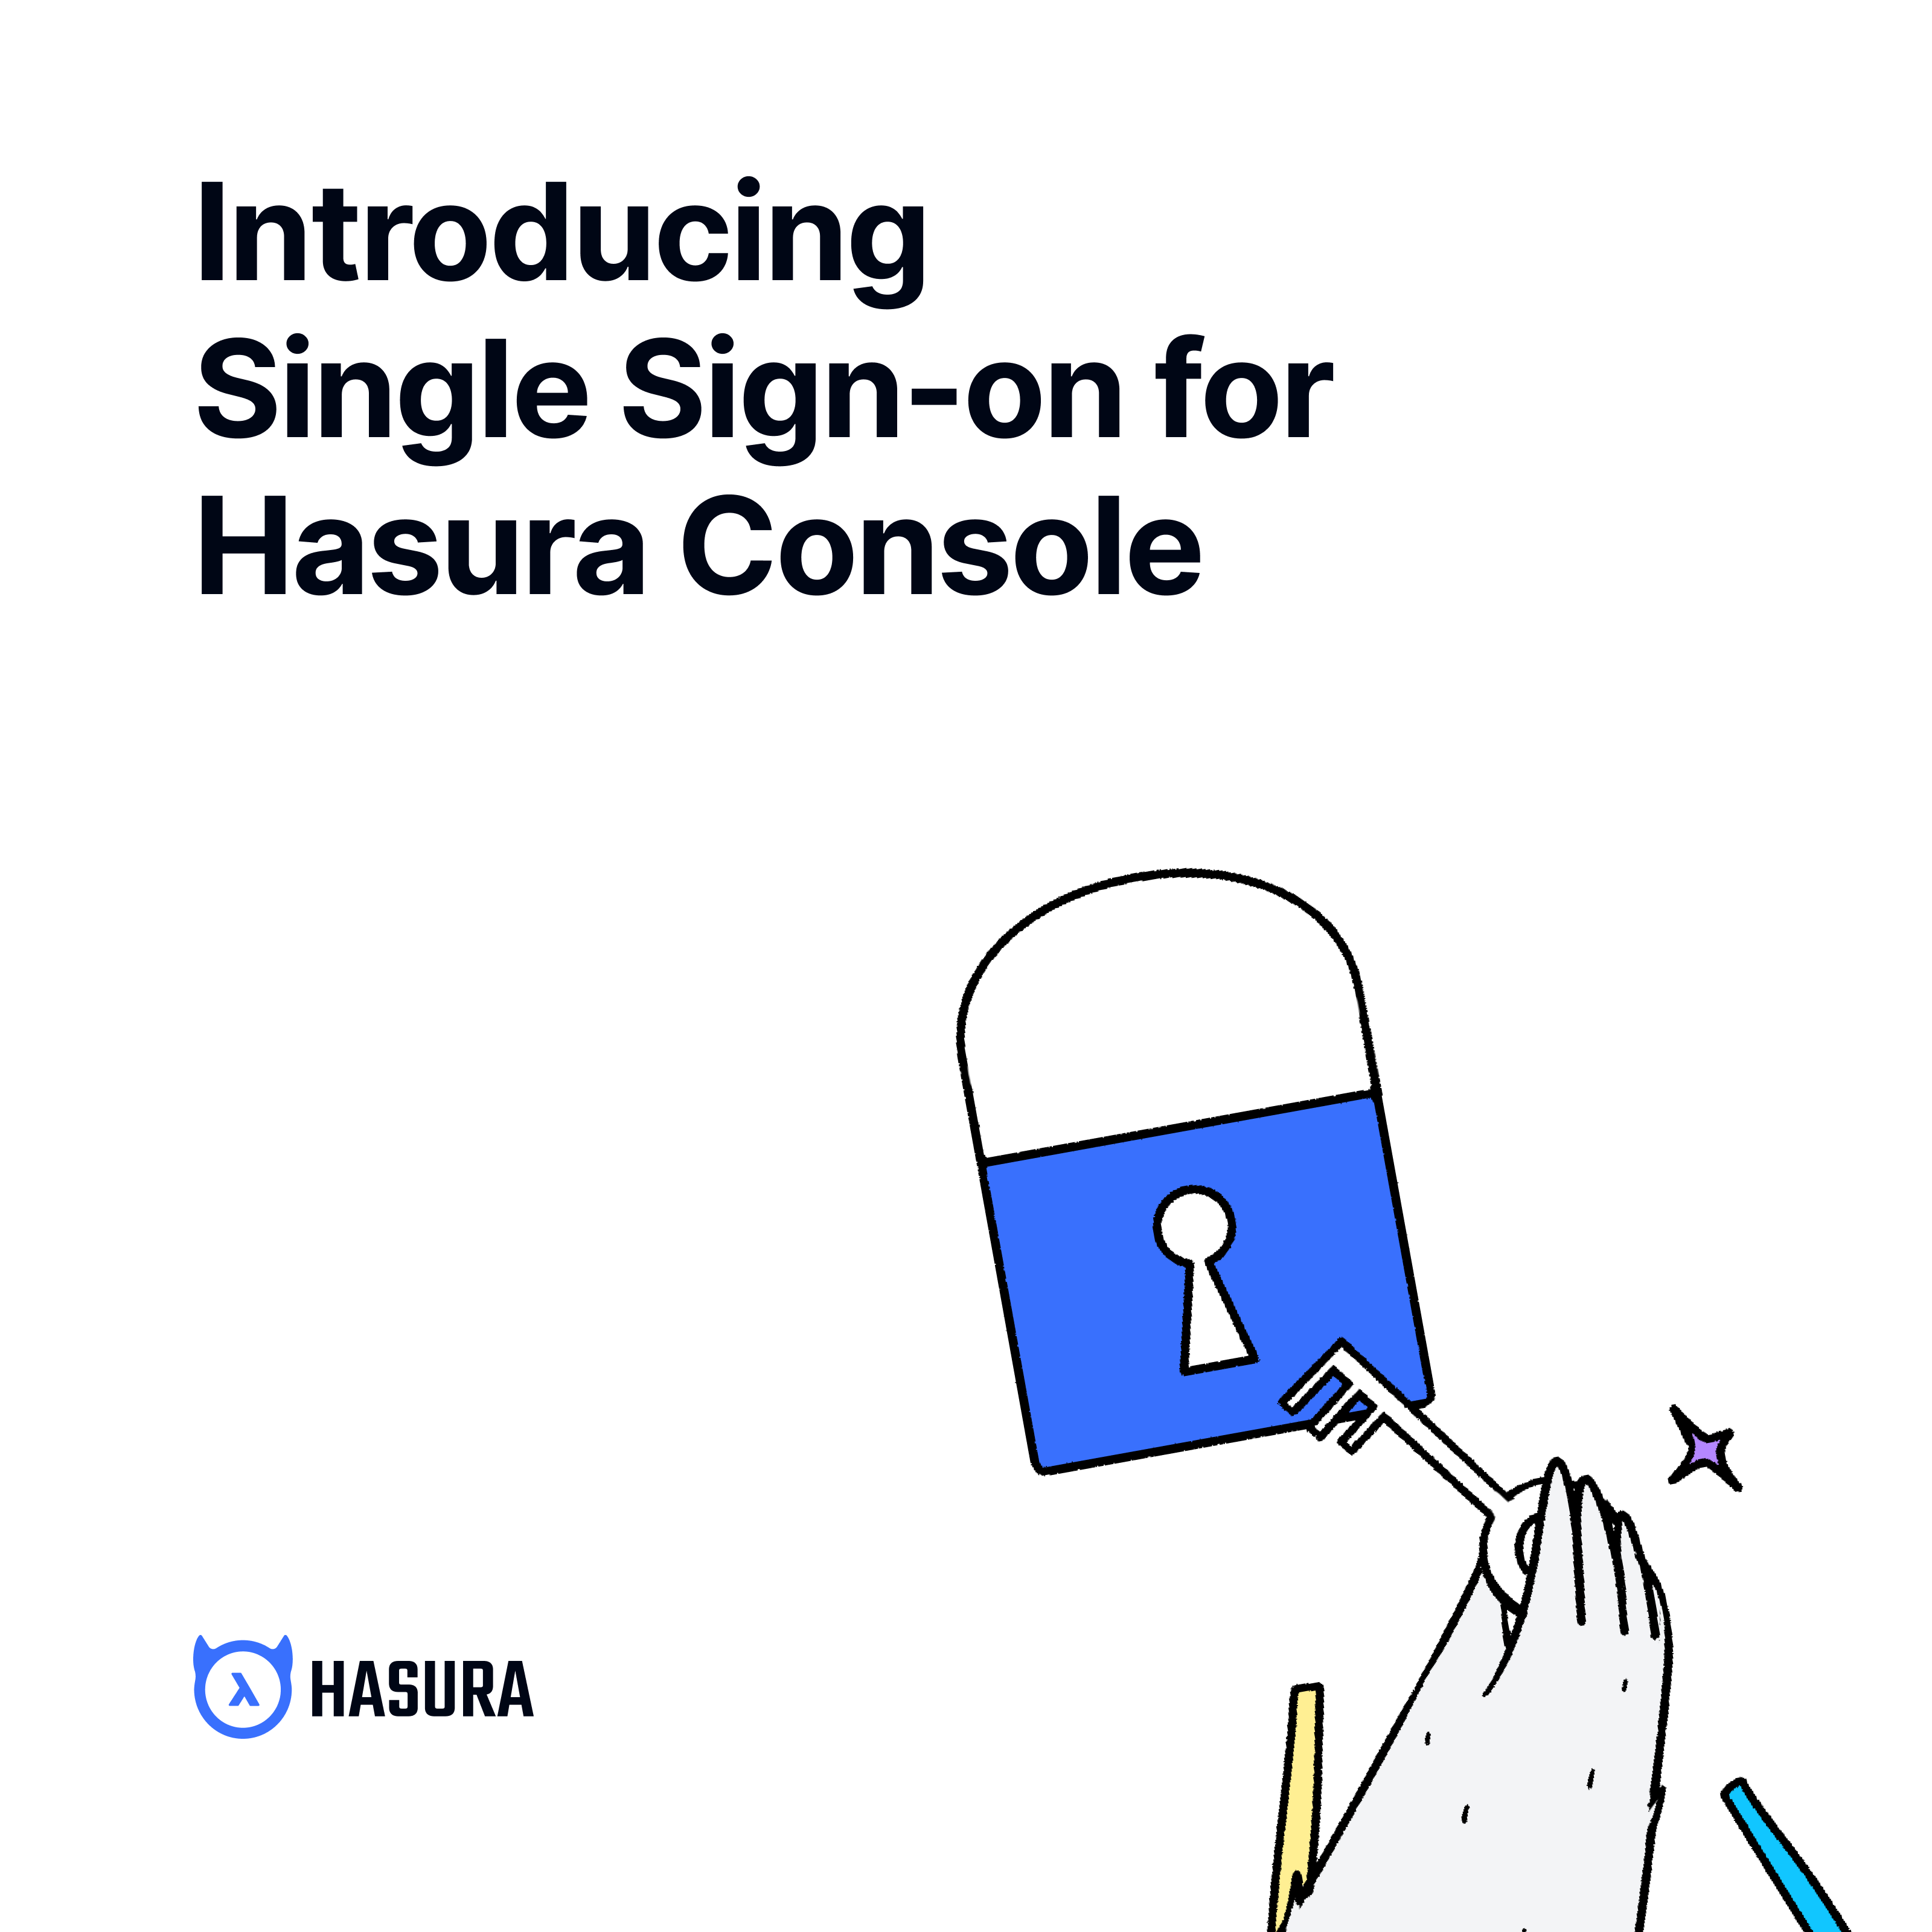 Introducing Single Sign-on for Hasura Console